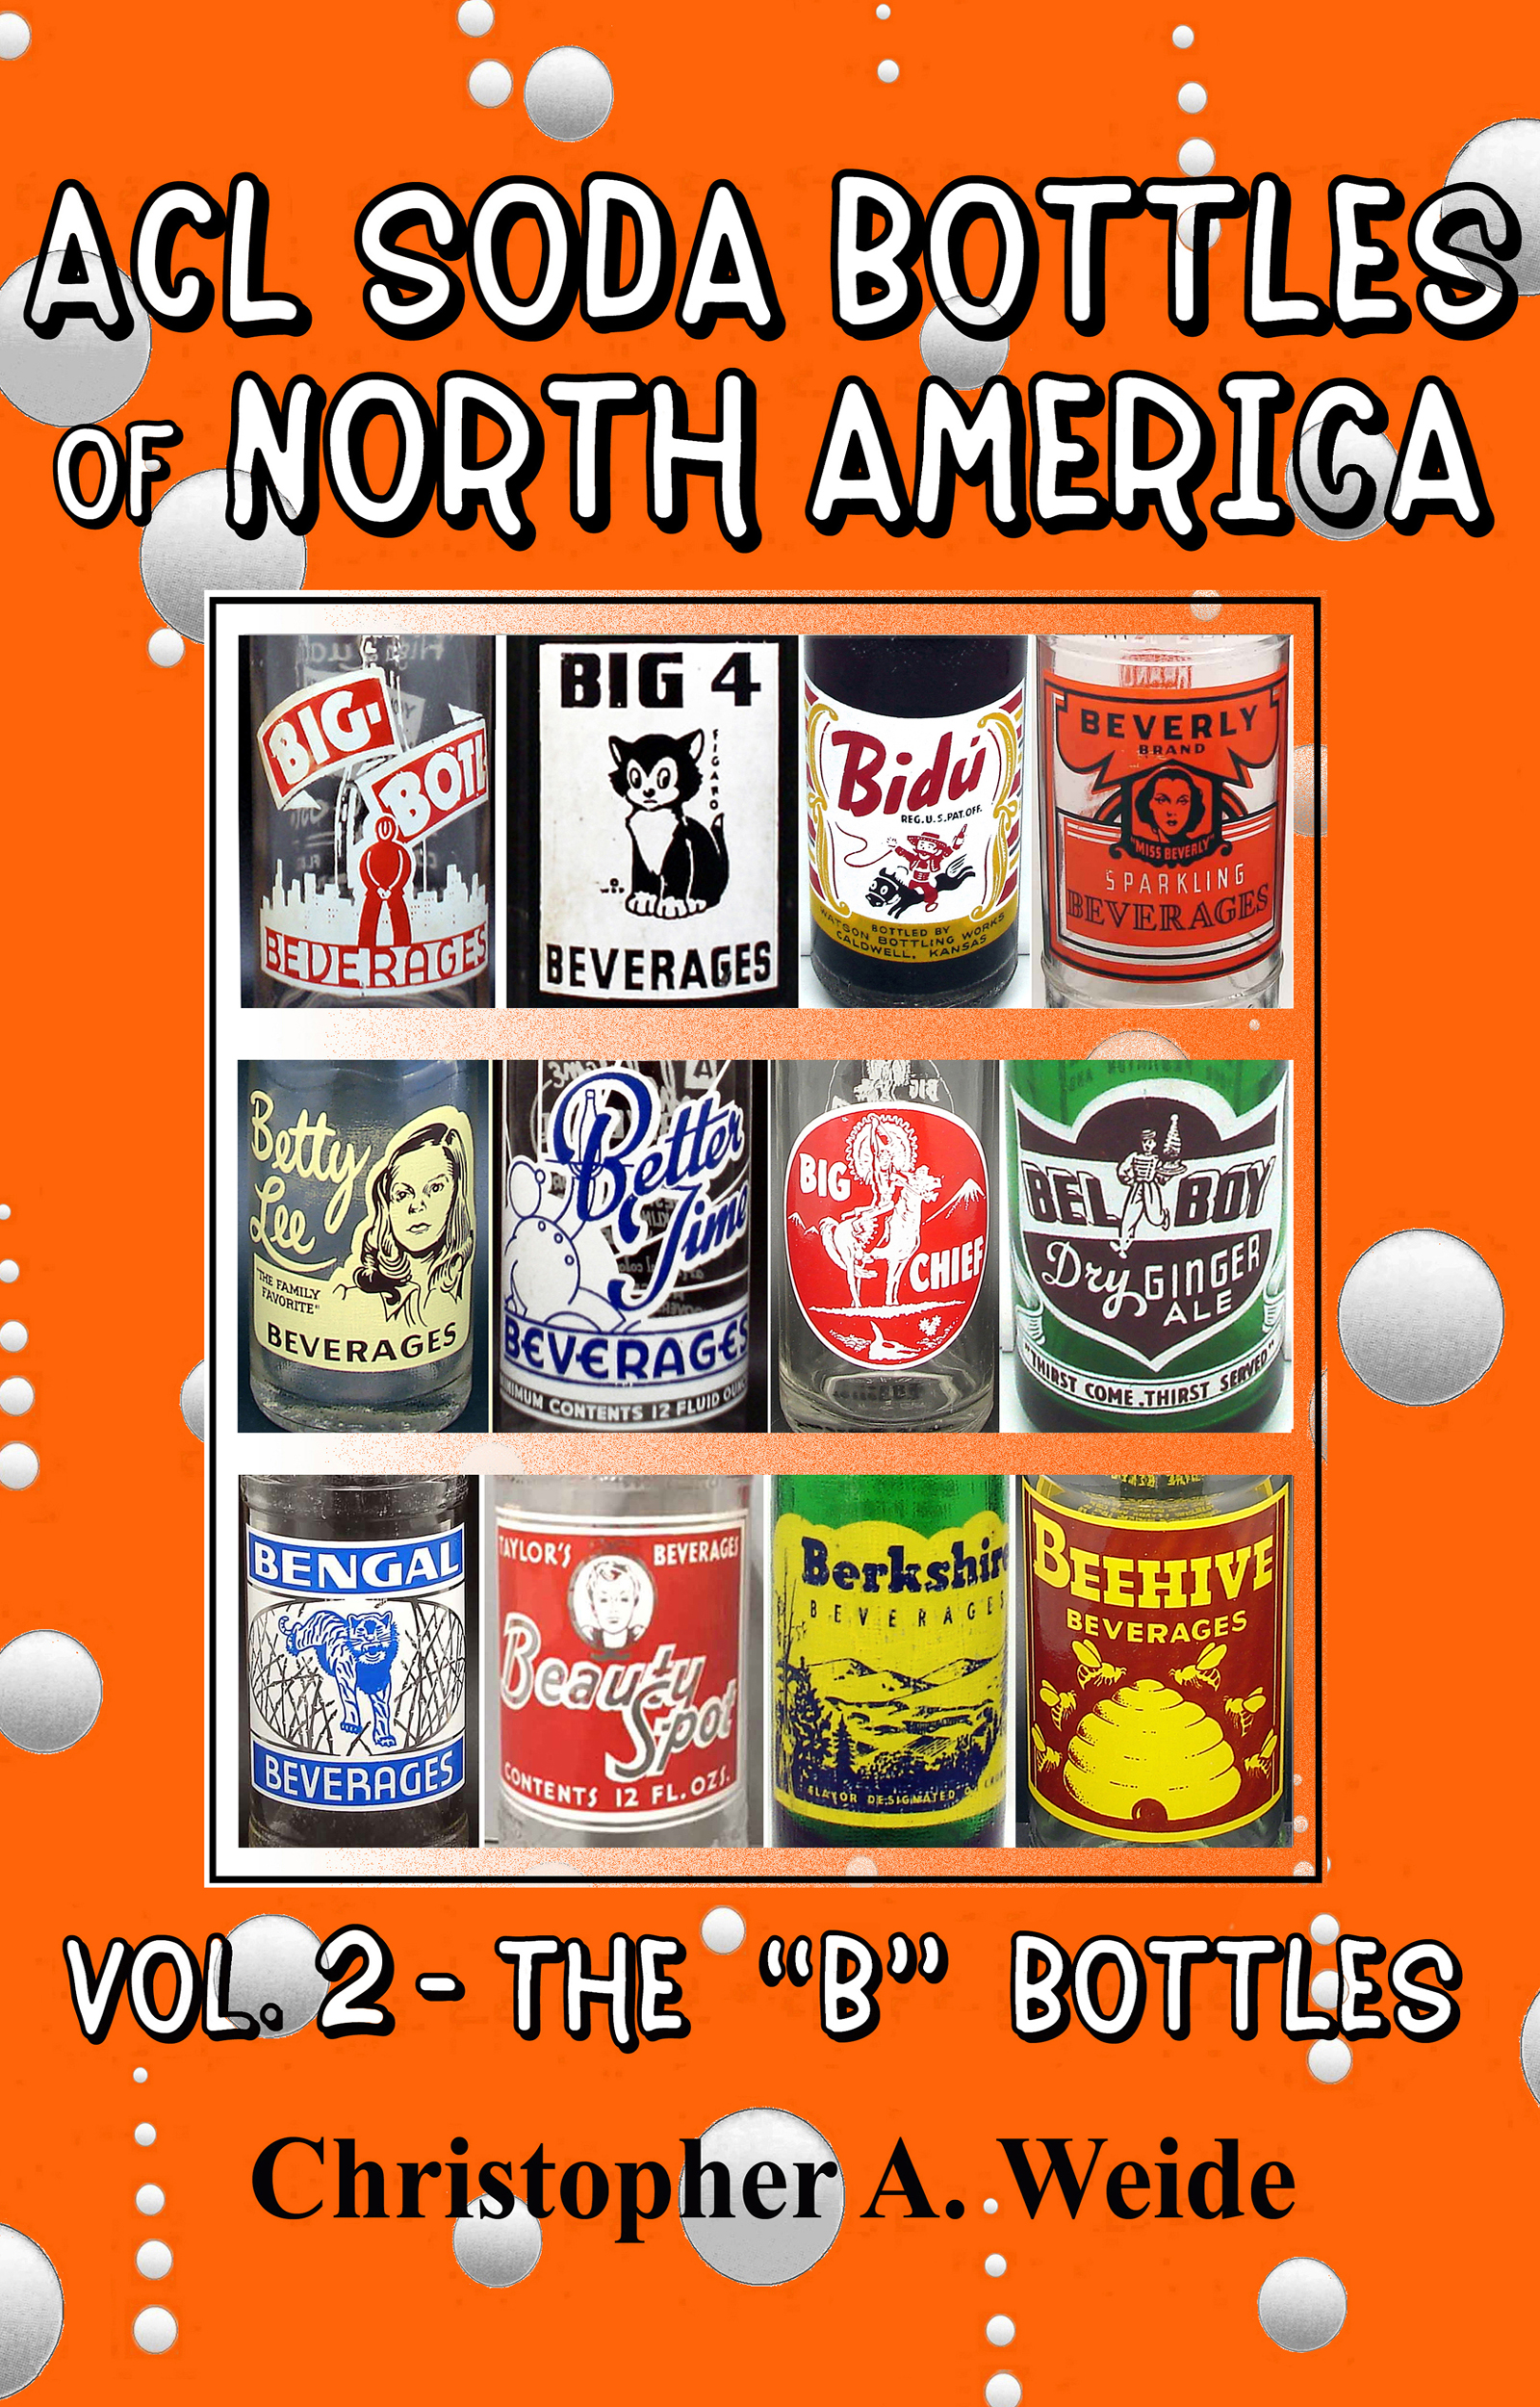 ACL Soda Bottles of North America - Vol. 2 the 'B' bottles